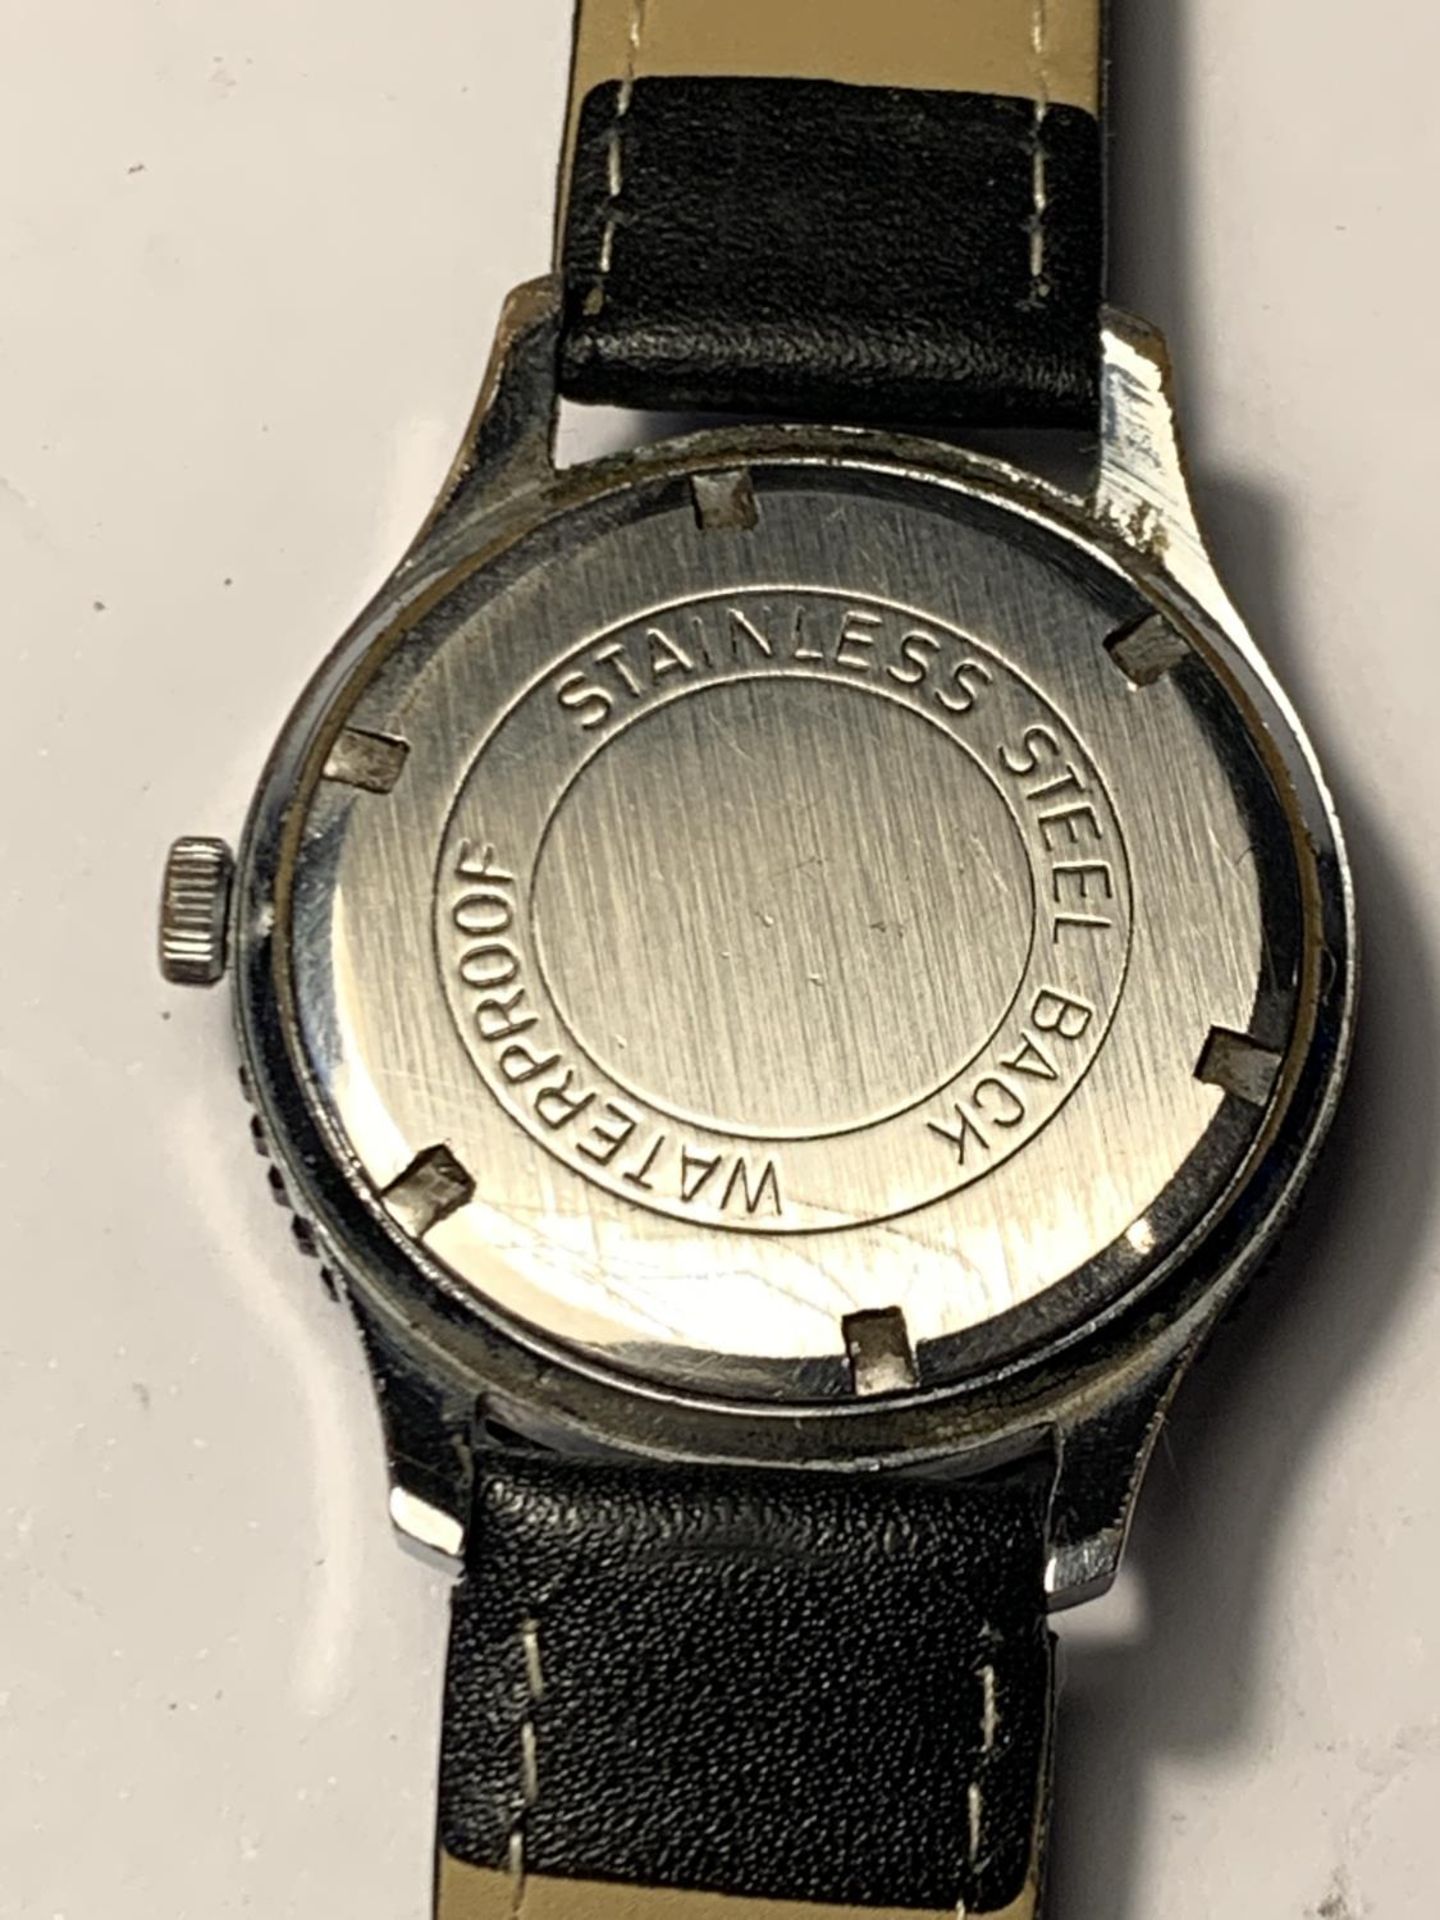 A VINTAGE INGERSOLL DIVERS WATCH - Image 3 of 3